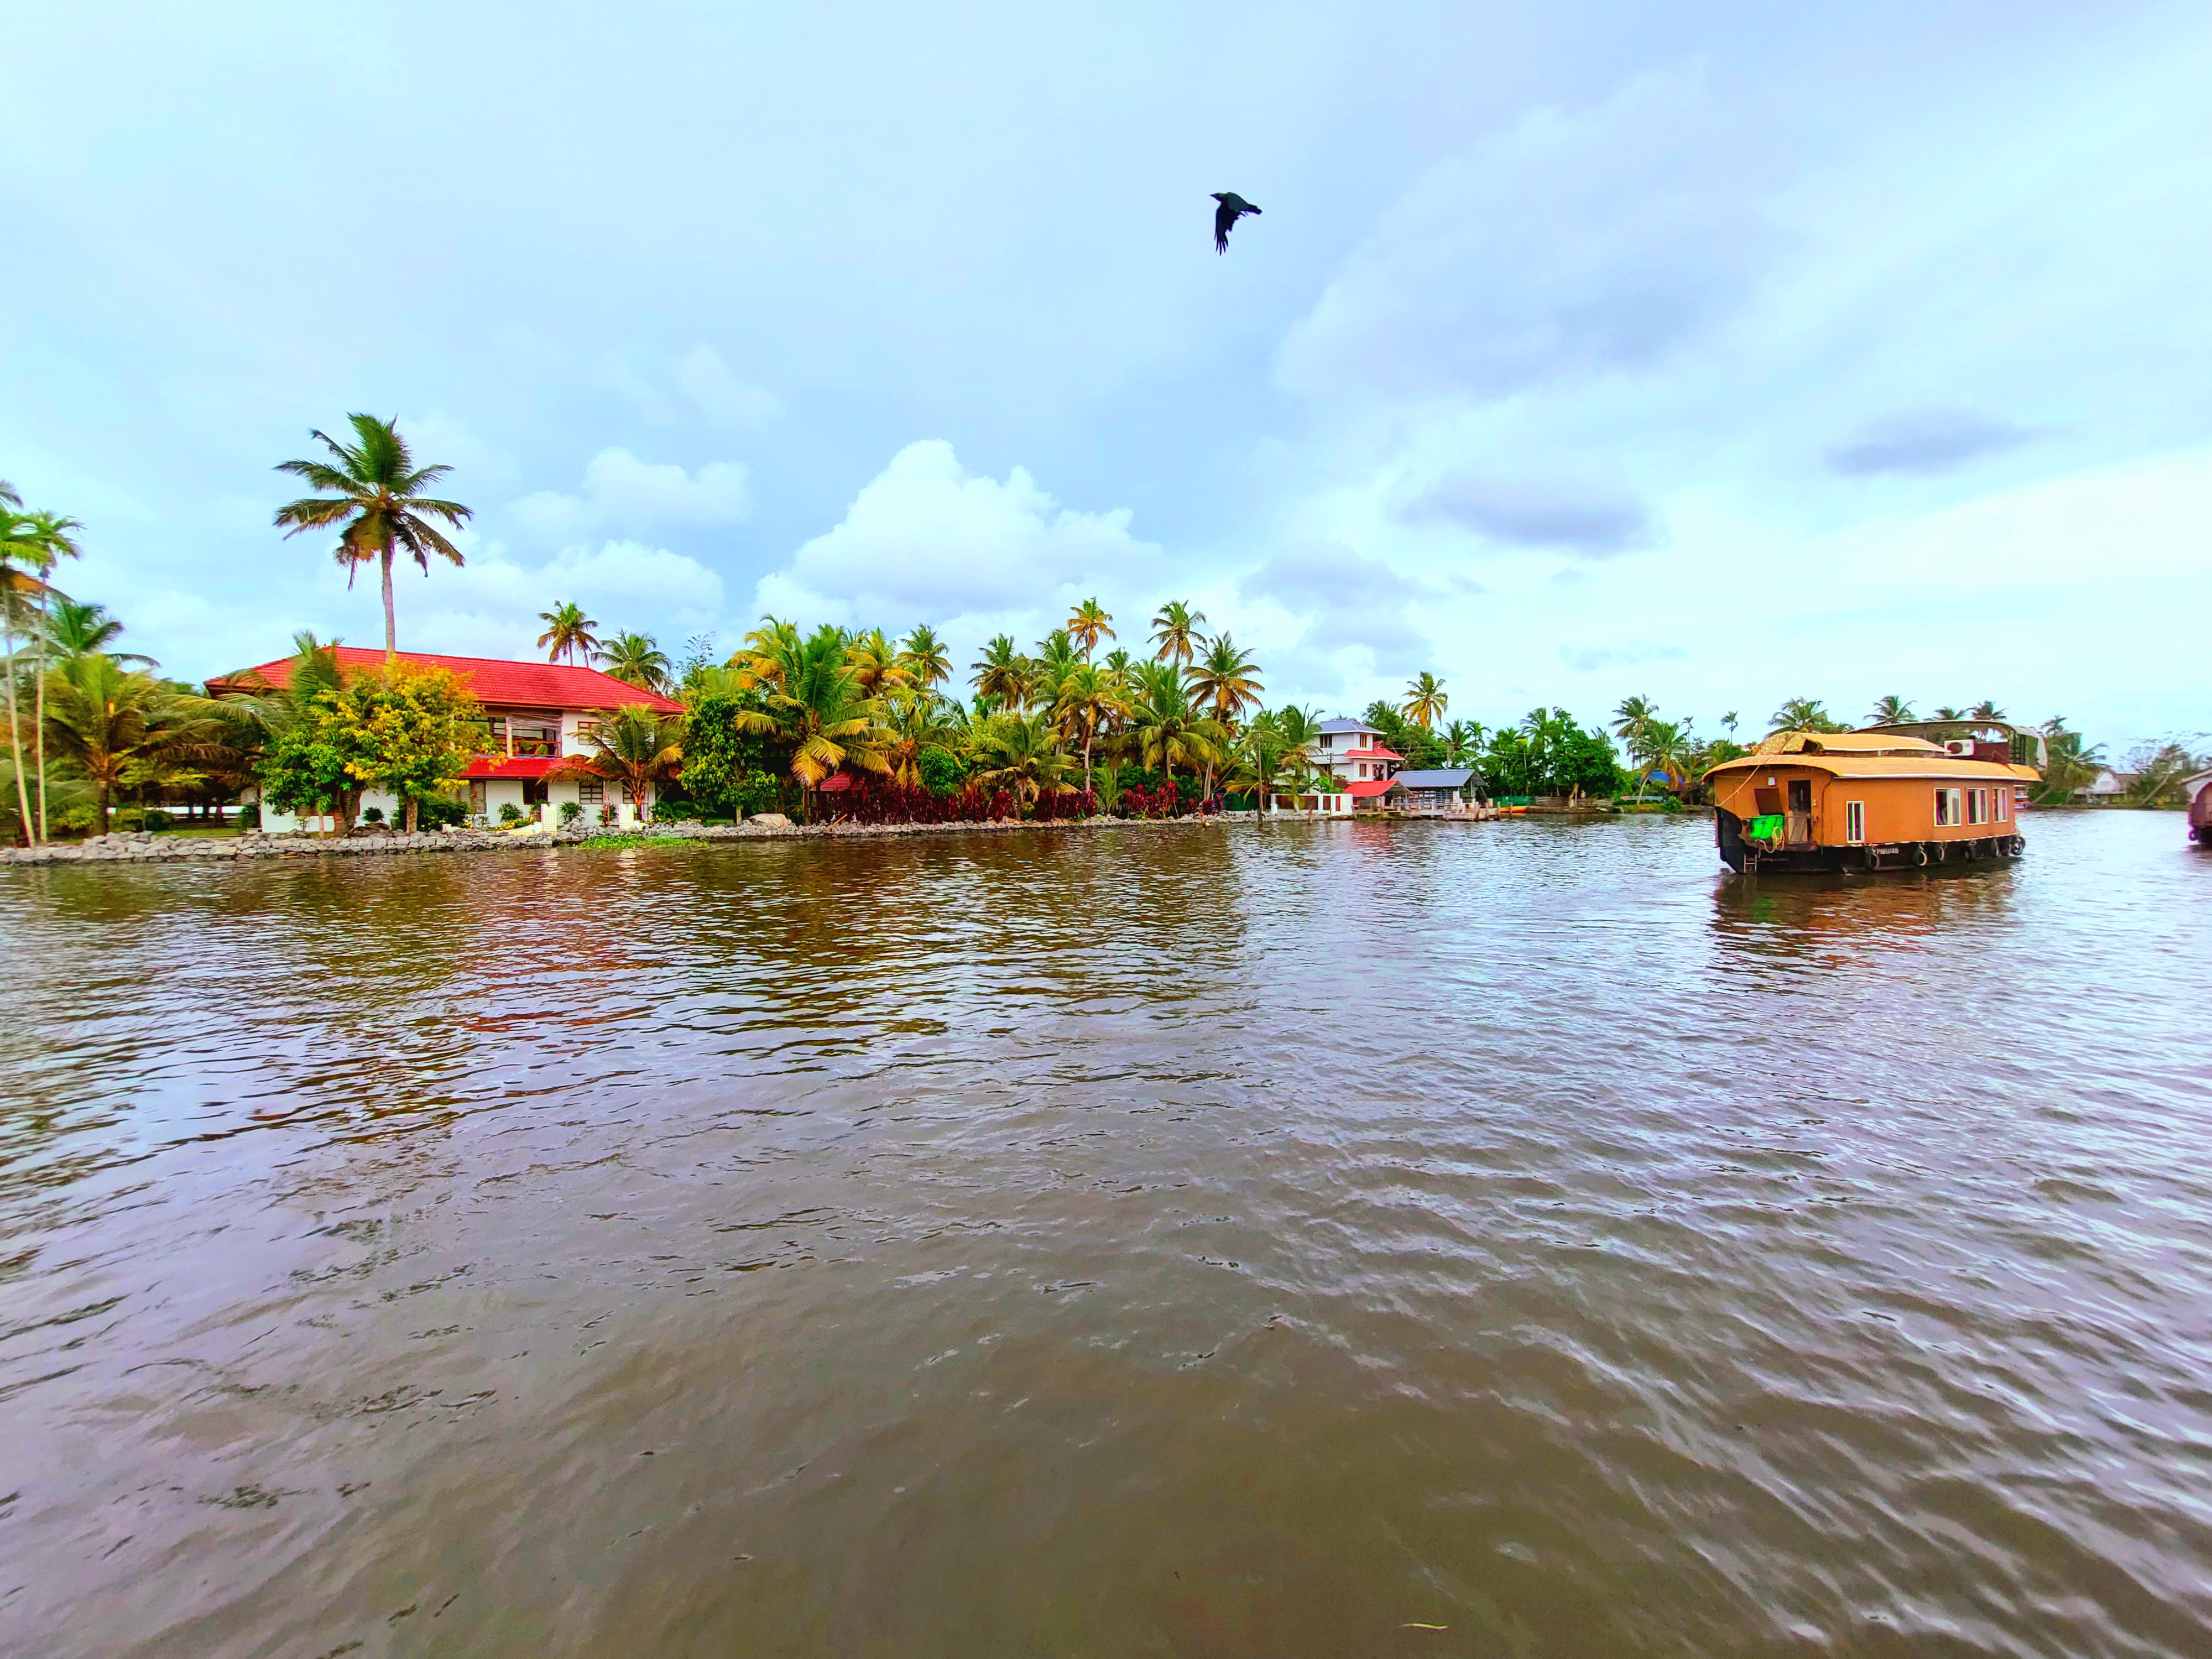 Traditional Kerala boathouse in Allepey backwaters sailing across a local home
Photo credit: Ameena Navab